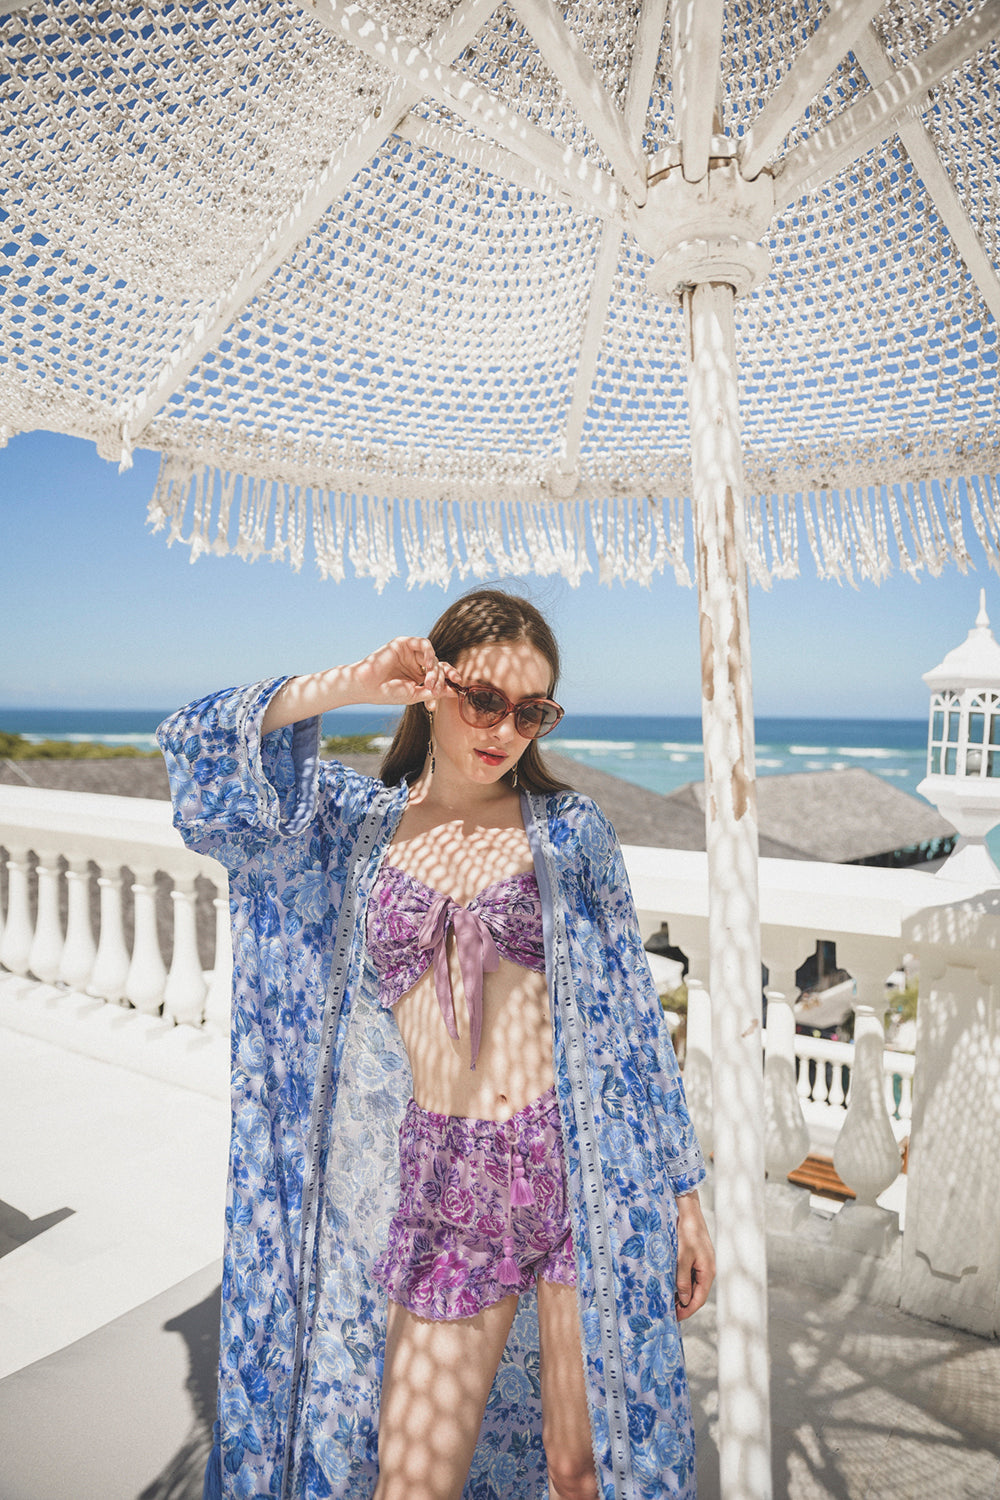 Wrap yourself in luxury with the Peony Long Robe, a kimono-style masterpiece from Tulle and Batiste's Peony collection, crafted ethically by Balinese artisans